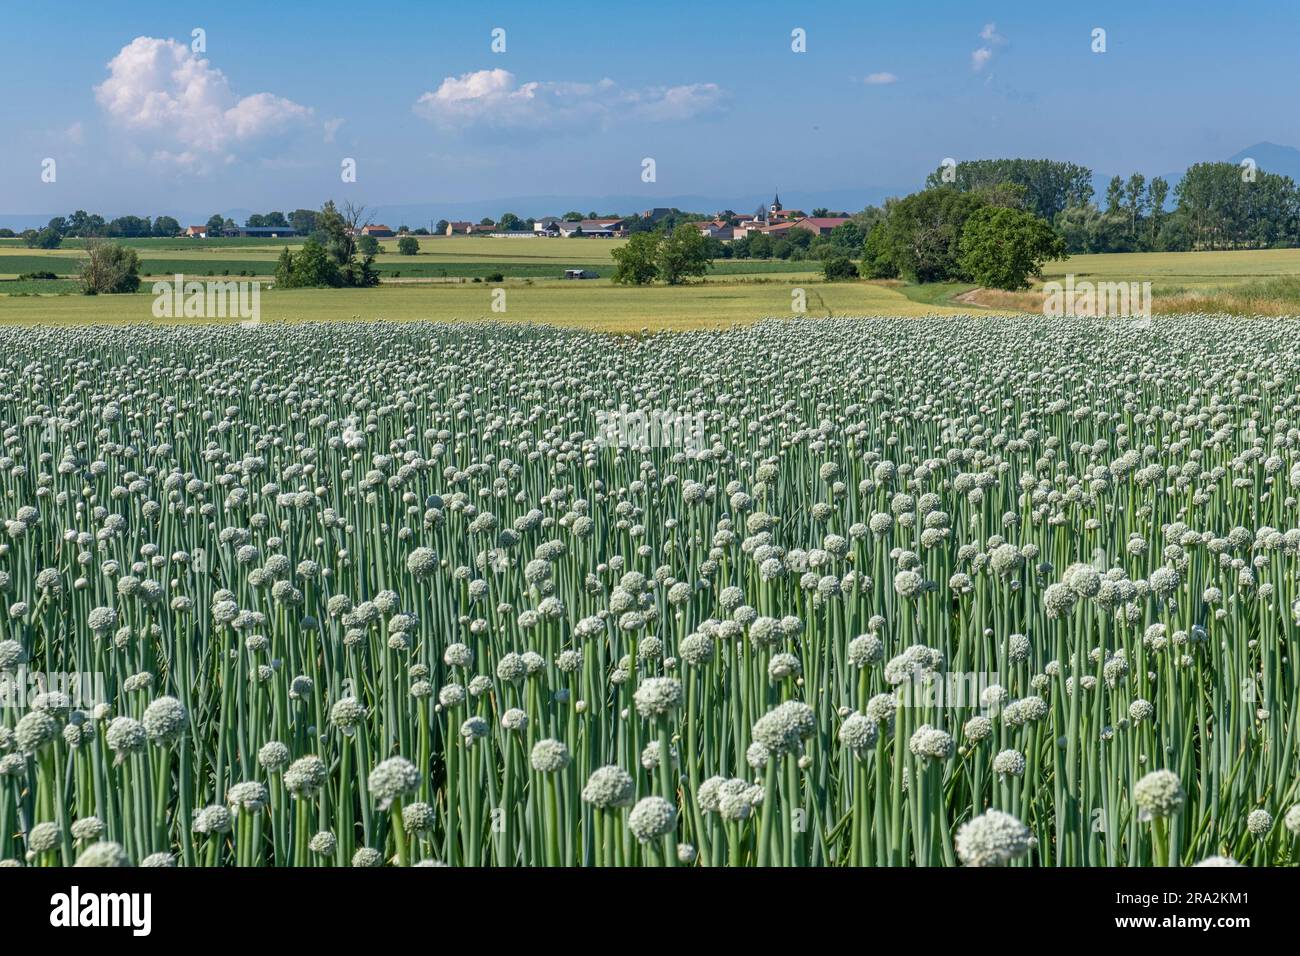 France, Puy de Dome, Chappes, growing onions for seed production, plain of Limagne, near Riom, Chaine des Puys in the background Stock Photo